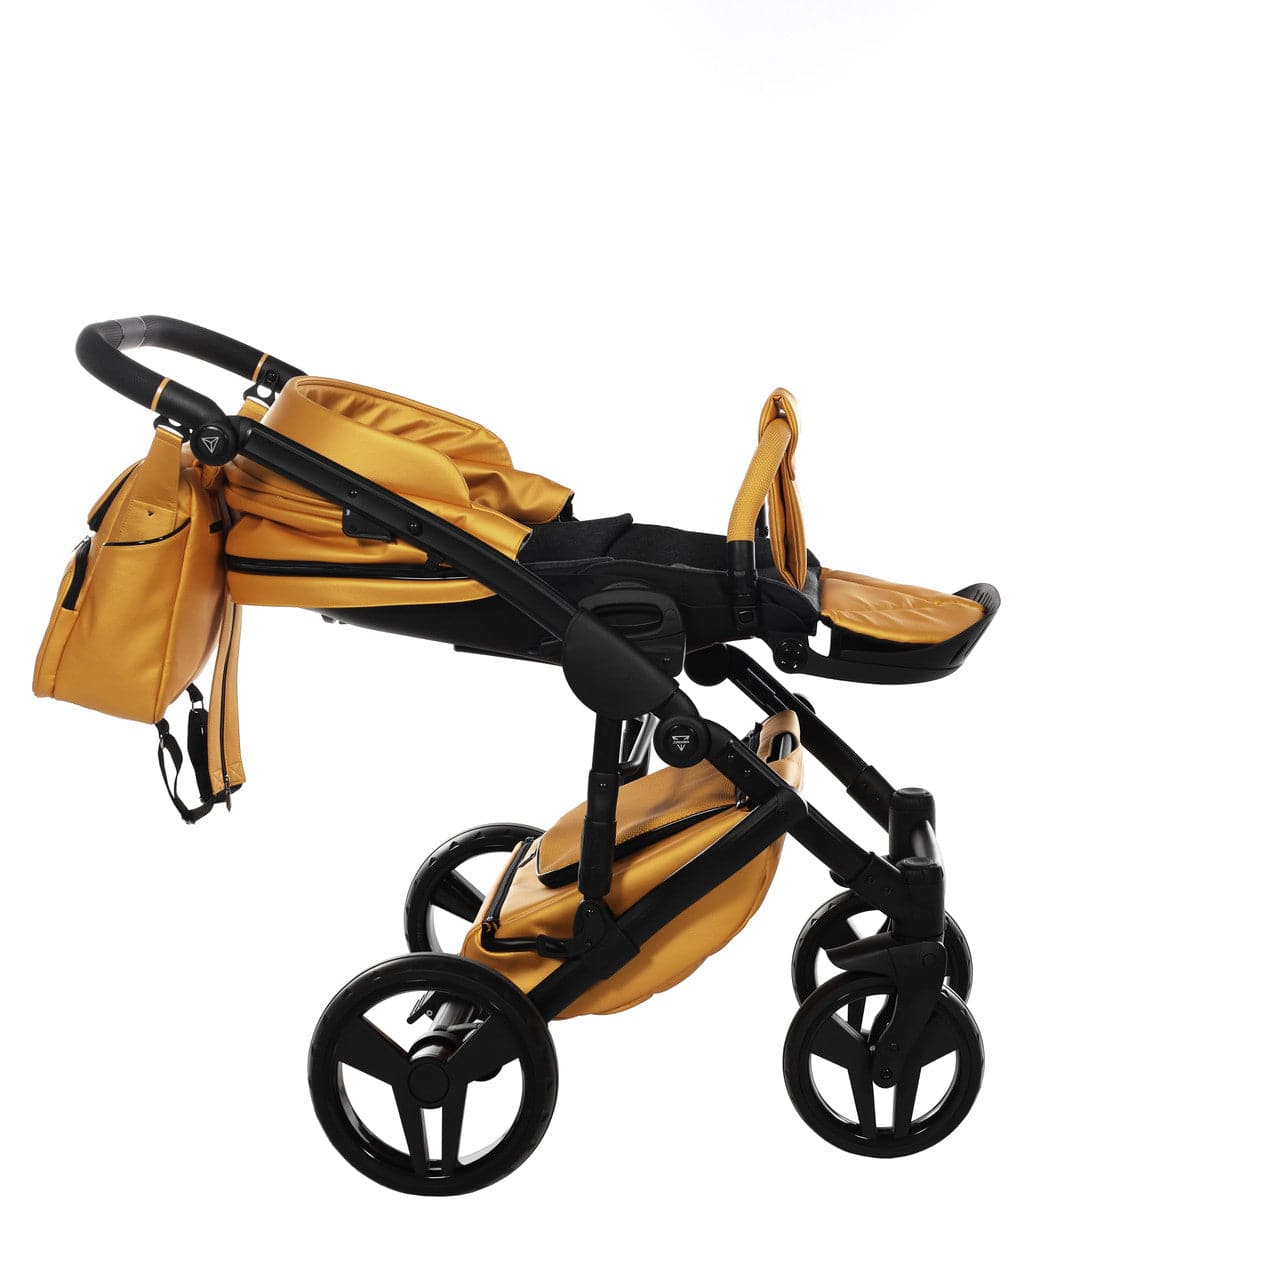 Junama S-Class 3 In 1 Travel System - Yellow - For Your Little One